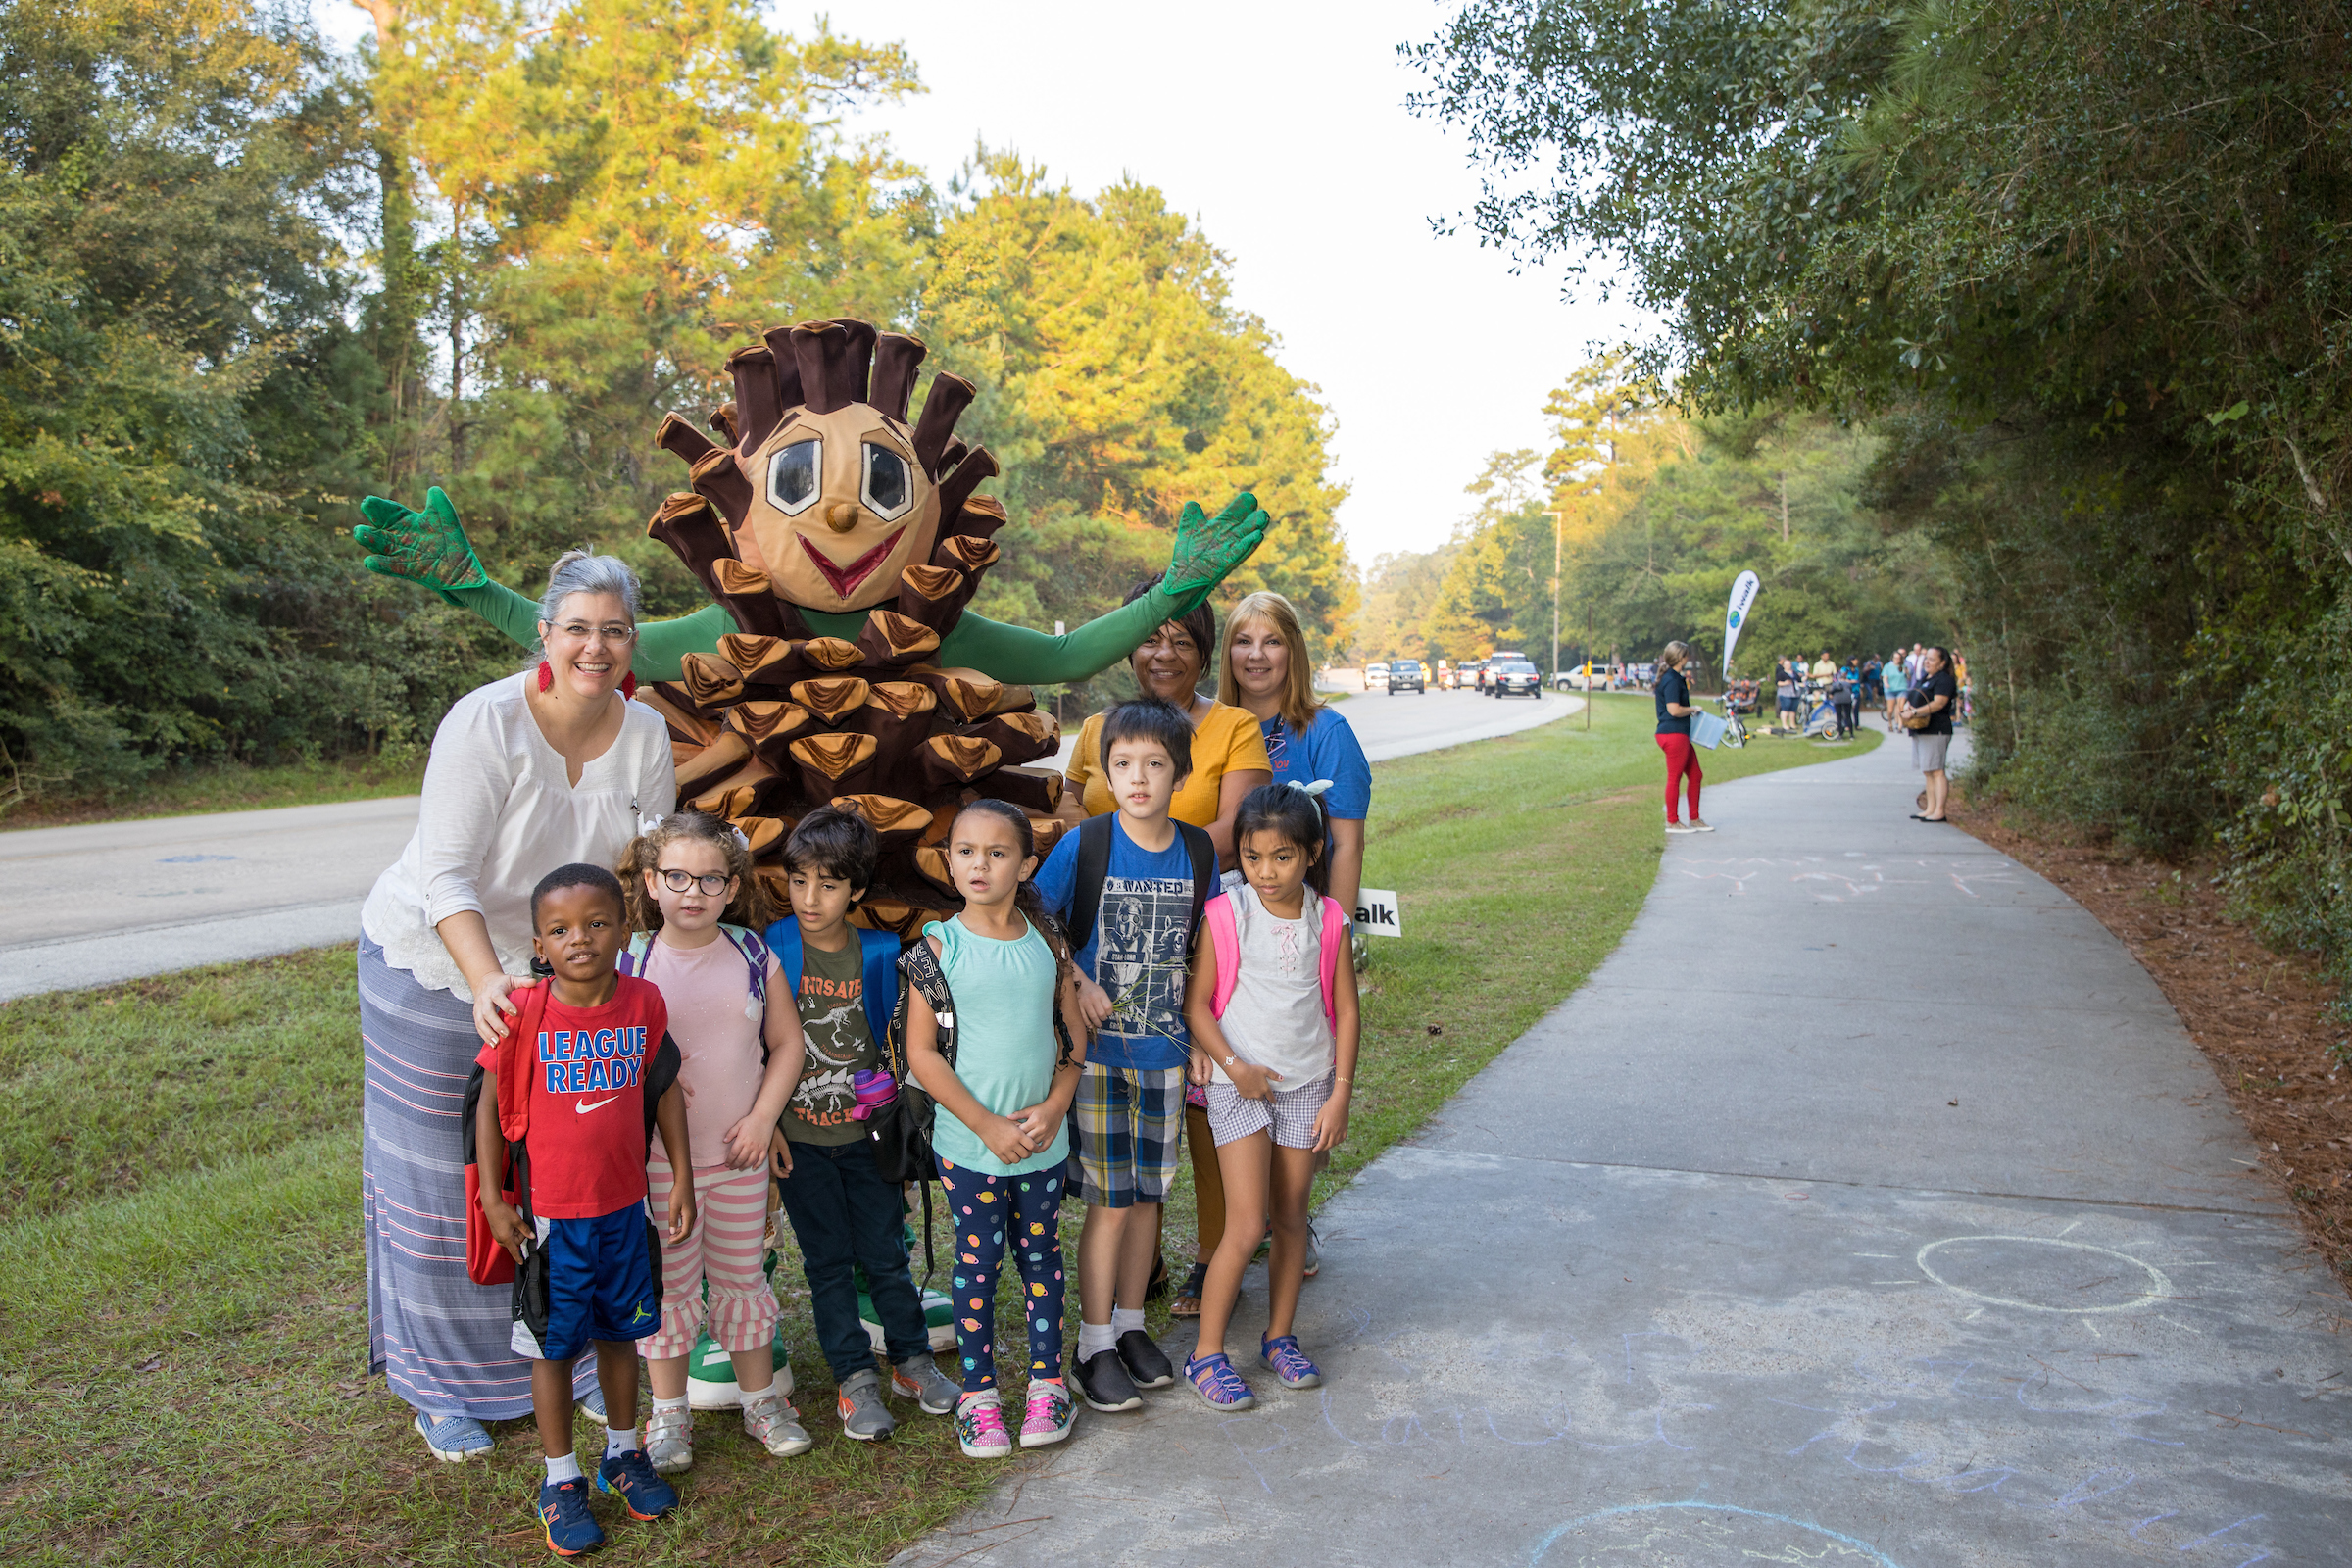 Participating in National Walk To School Day, students from around The Woodlands grabbed their favorite sneakers and stepped out on the many area paths to school early last month.